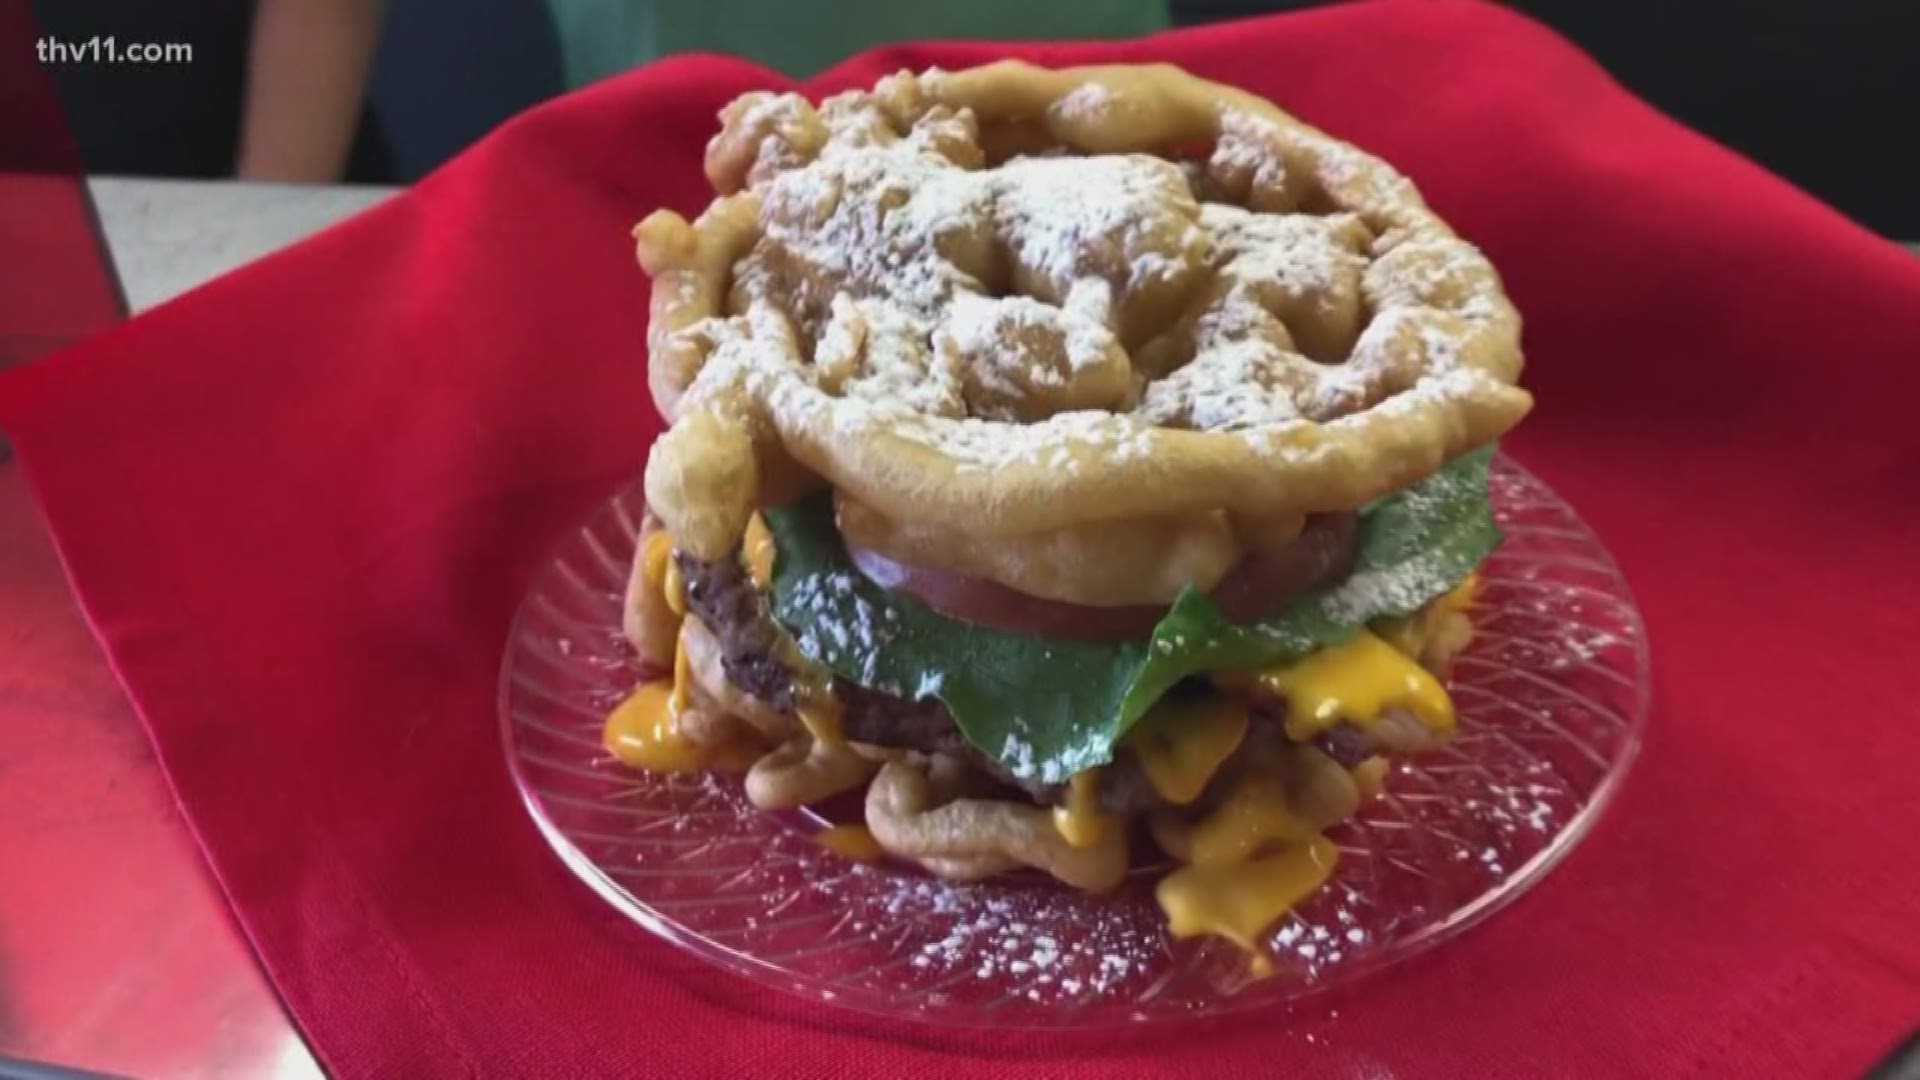 Lots of people are getting ready to converge in Little Rock for the 80th Annual Arkansas State Fair. Two of our own got a sneak peak at some of the food specialties!